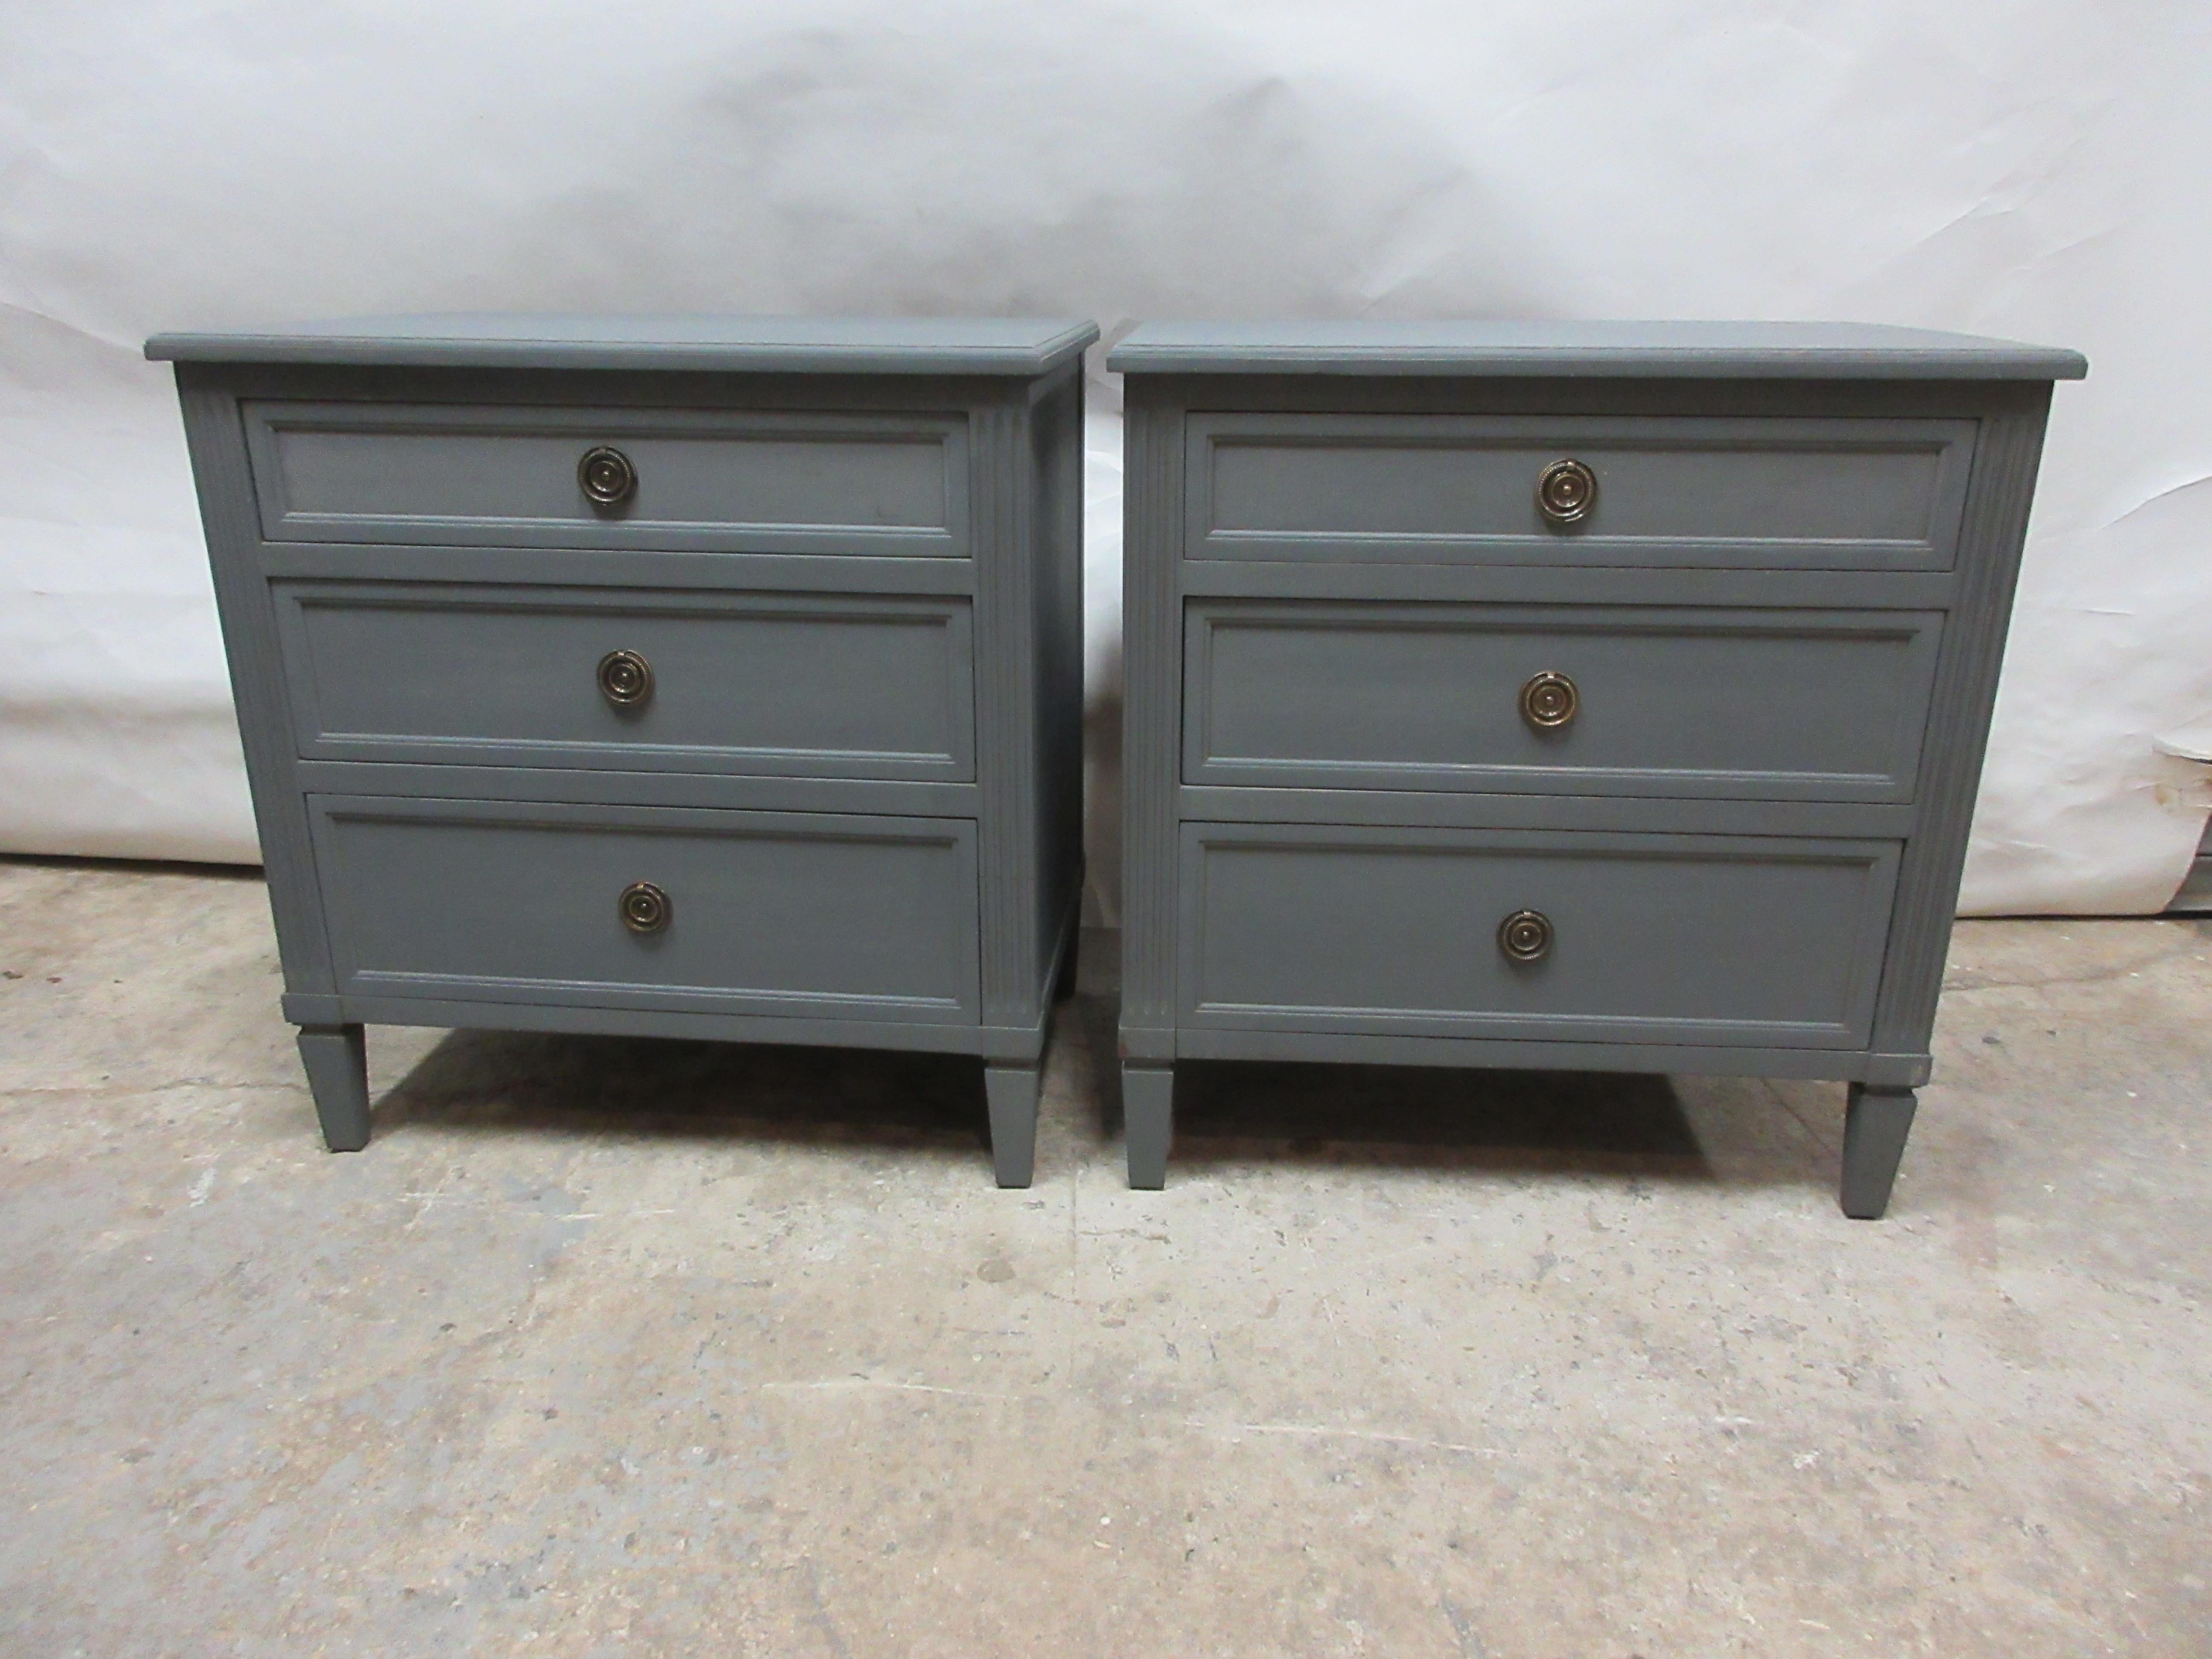 This is a set of 2 Swedish Gustavian chest of drawers, they have been restored and repainted with milk paints 